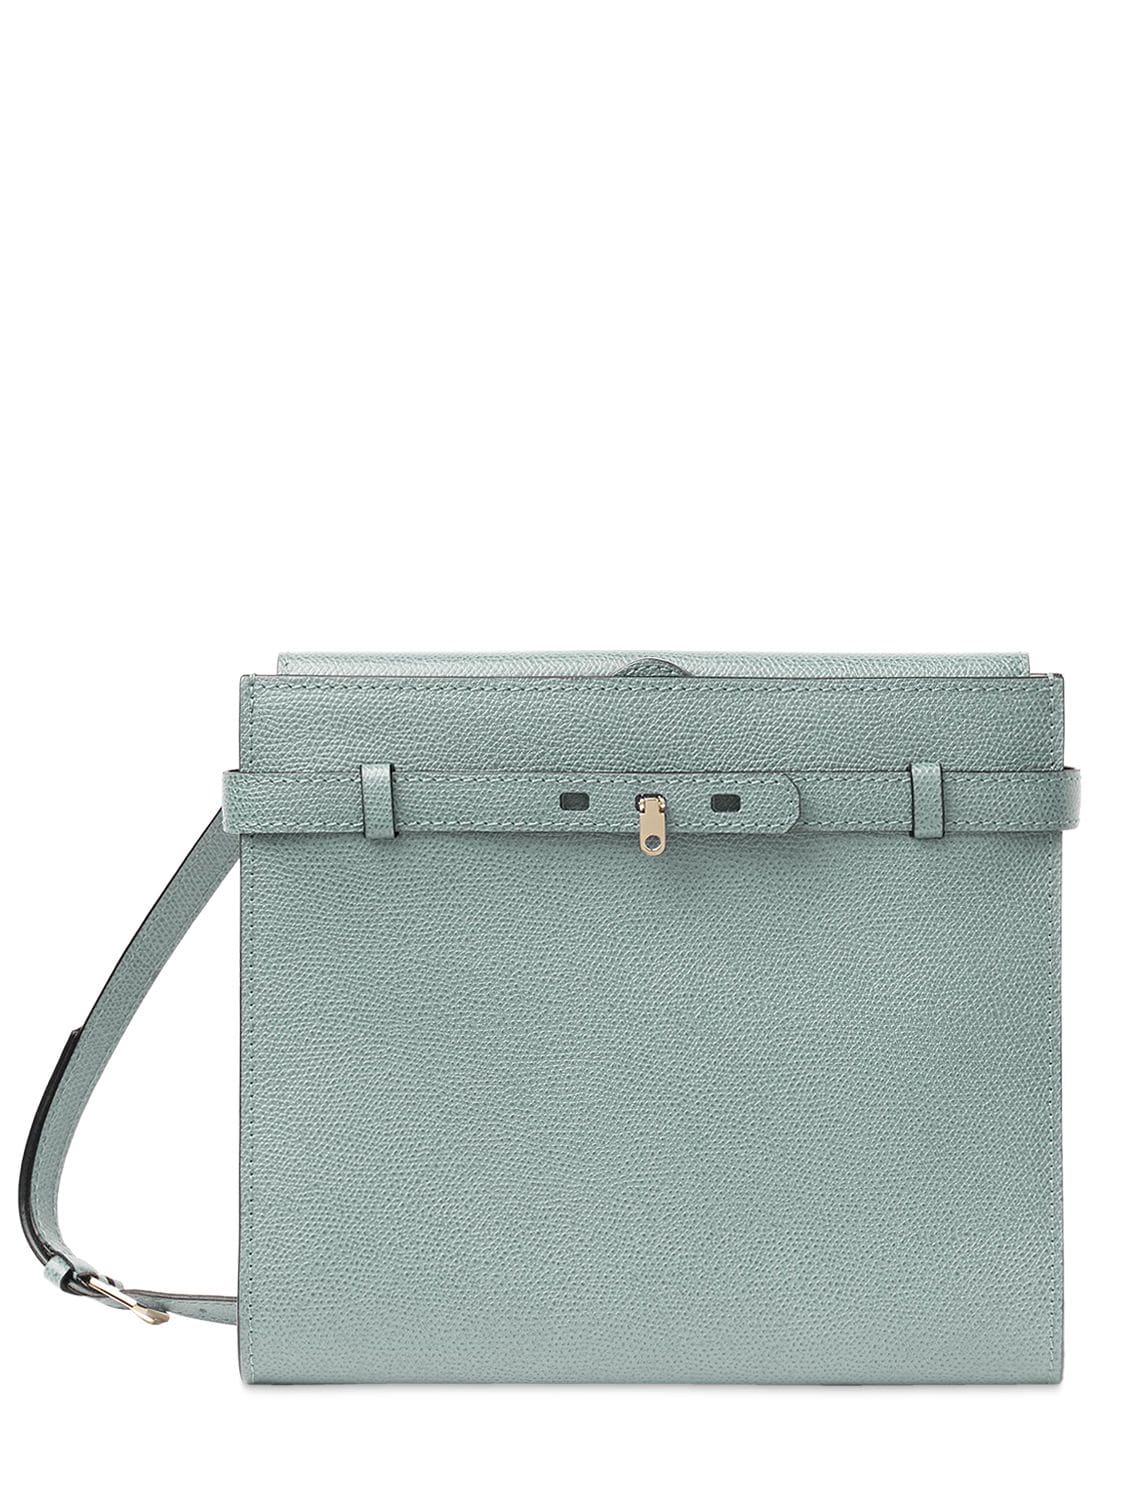 Valextra Brera B-tracollina Textured-leather Shoulder Bag In Blue 